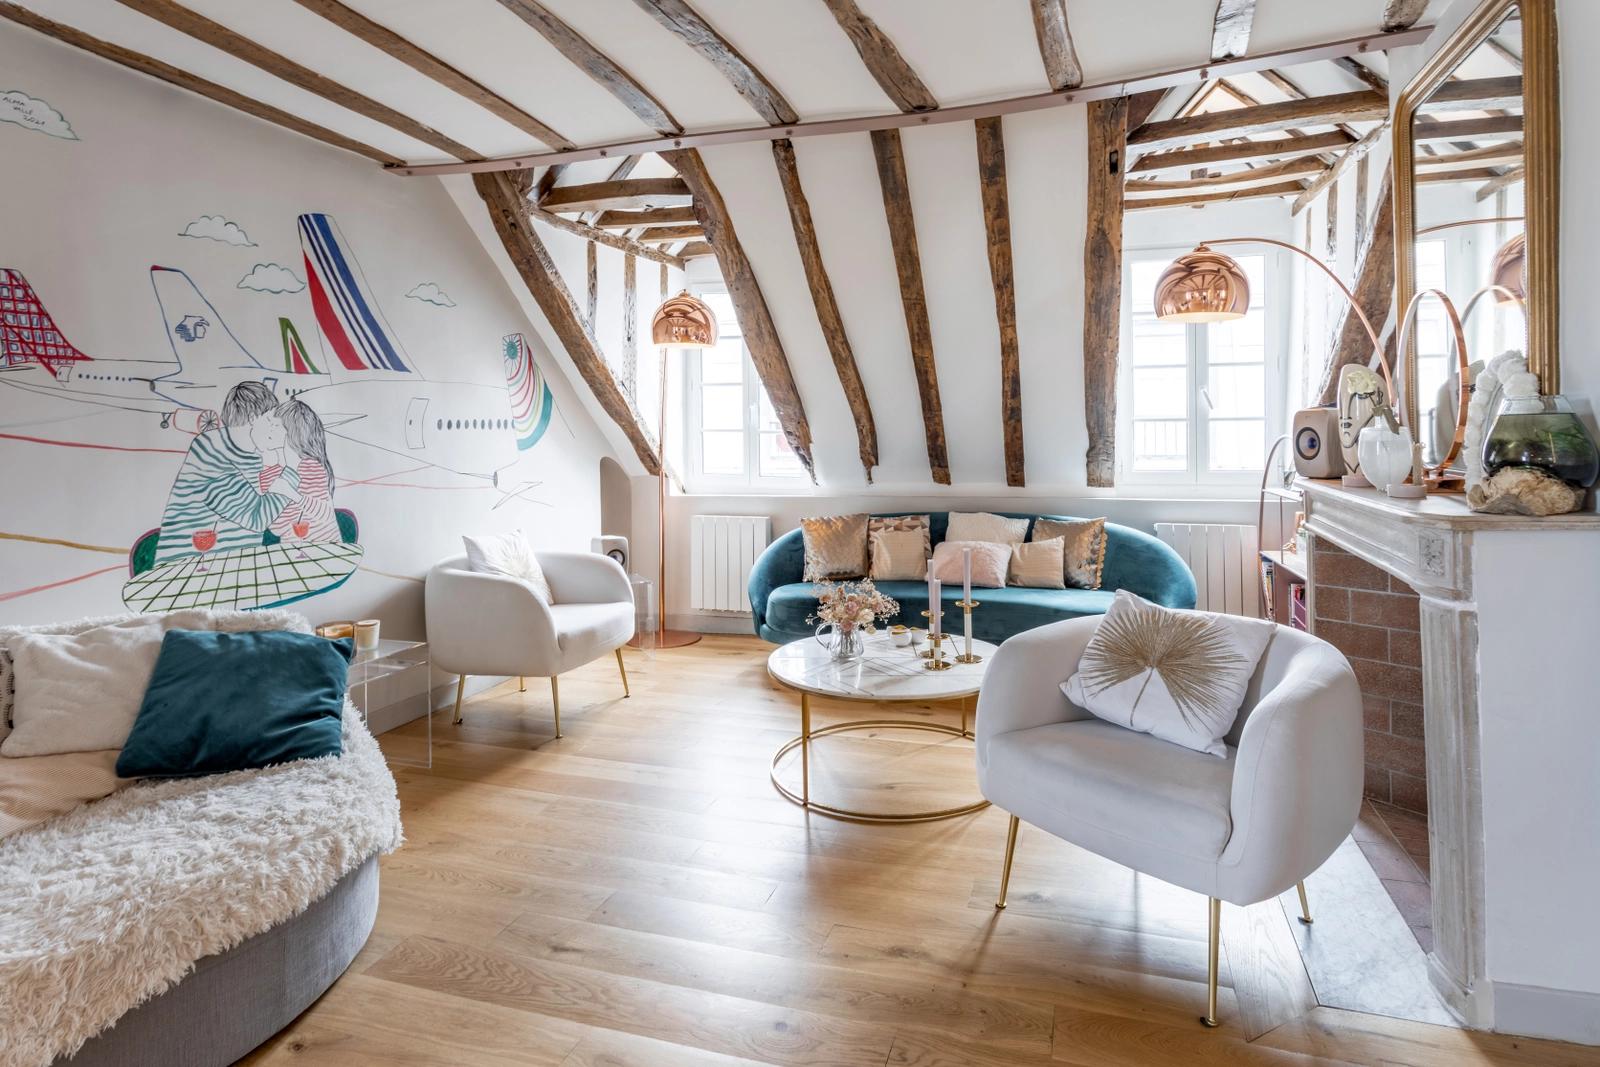 Charming apartment with exposed beams